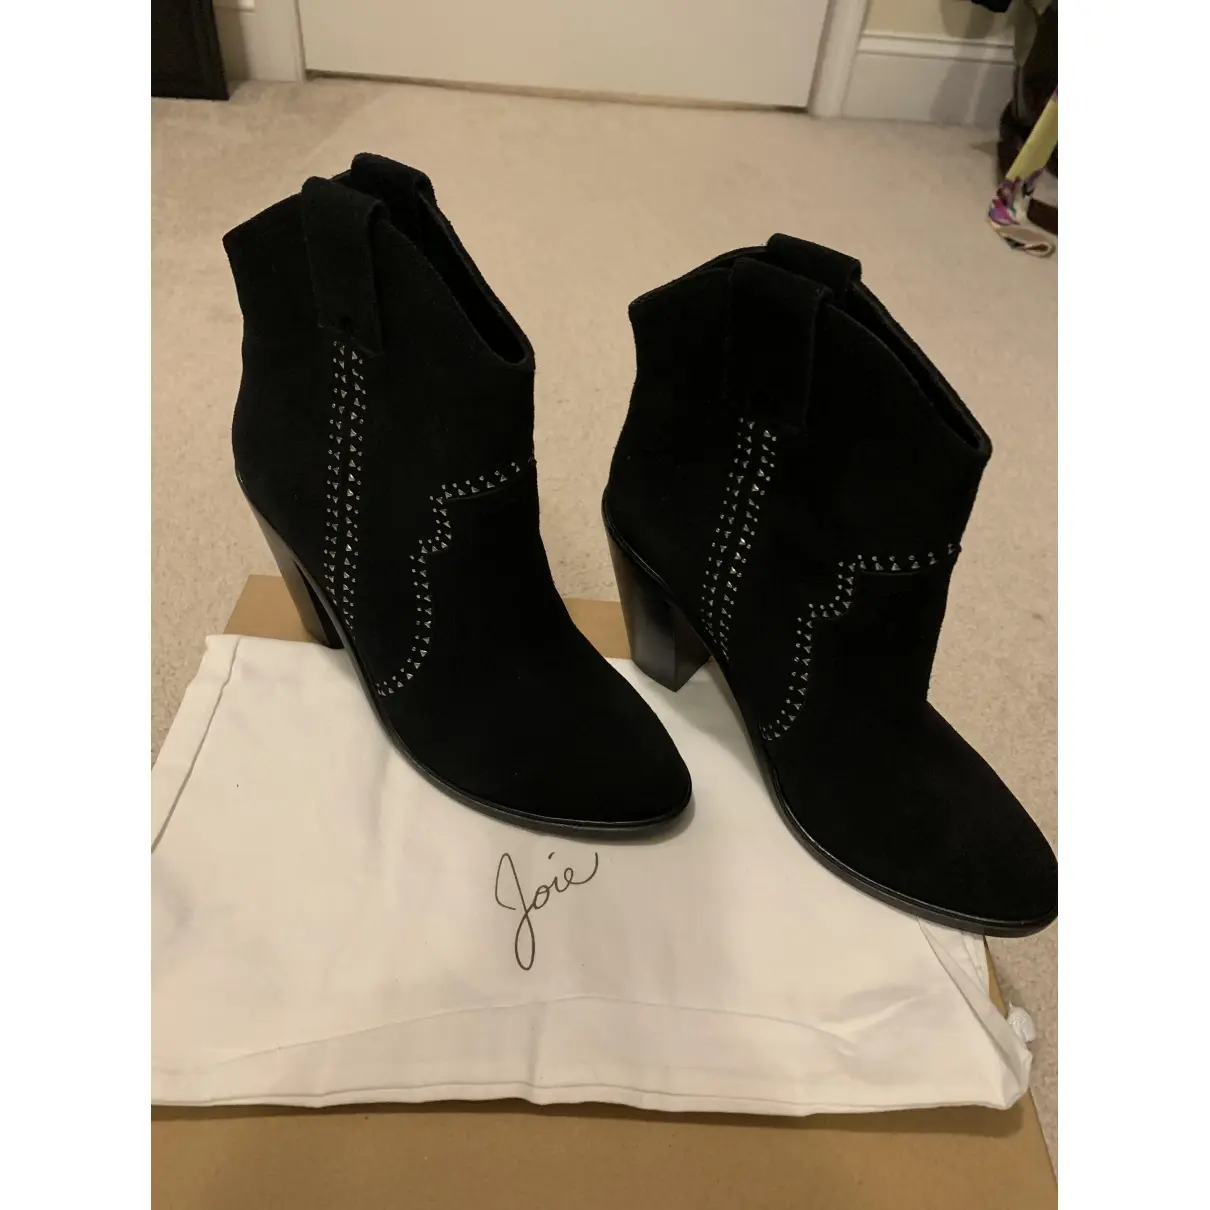 Joie Western boots for sale